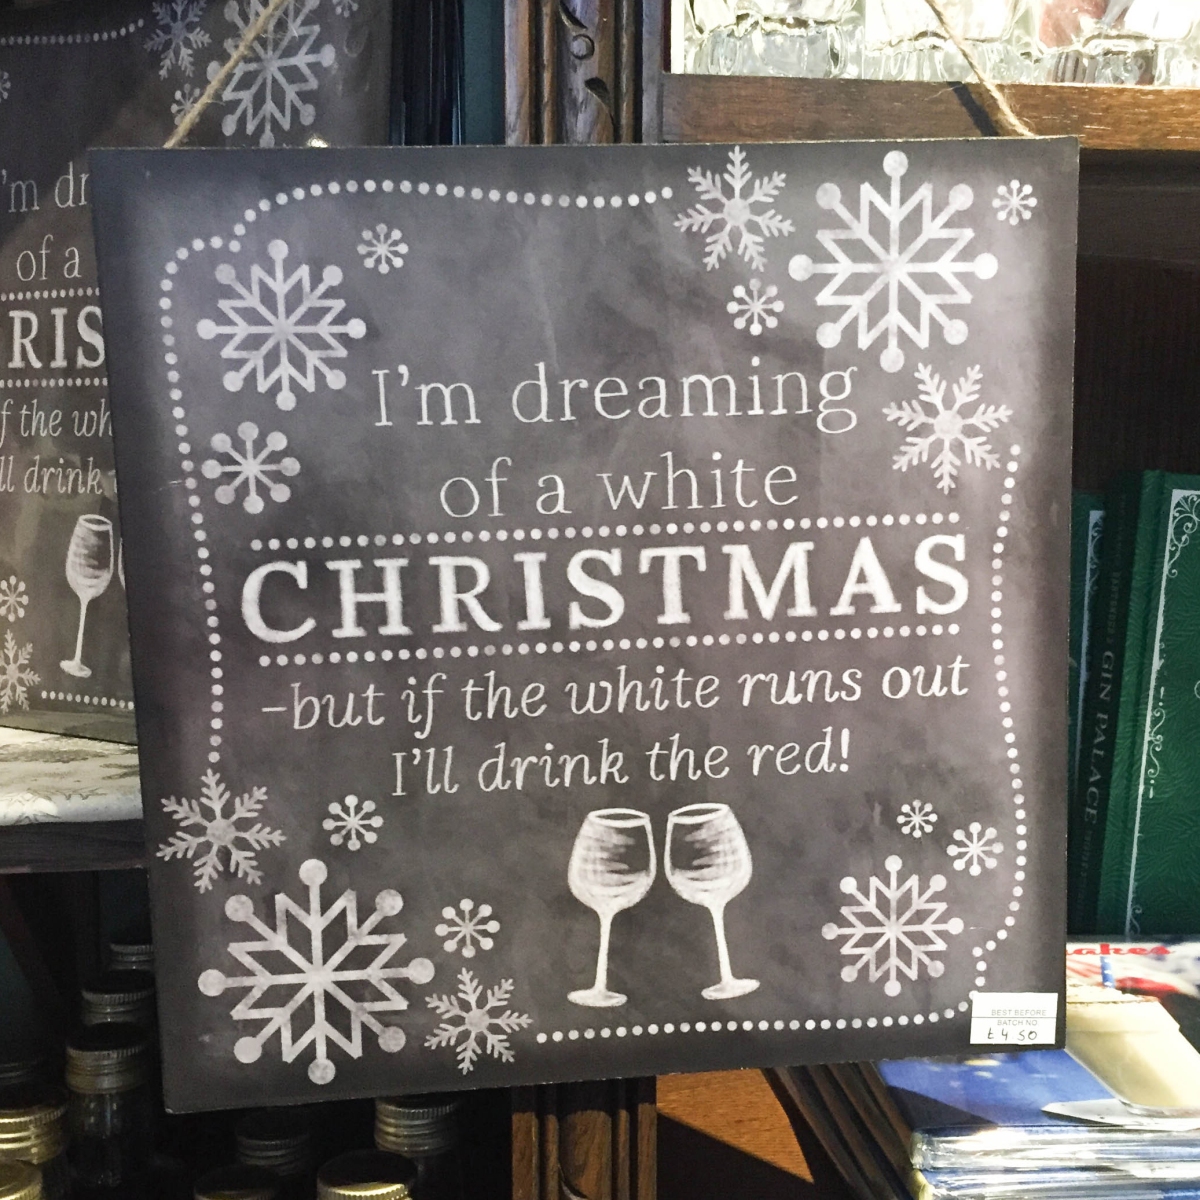 A photograph of a blackboard sign at Ely Gin saying, "I'm dreaming of a white Christmas, but if the white runs out I'll drink the red"